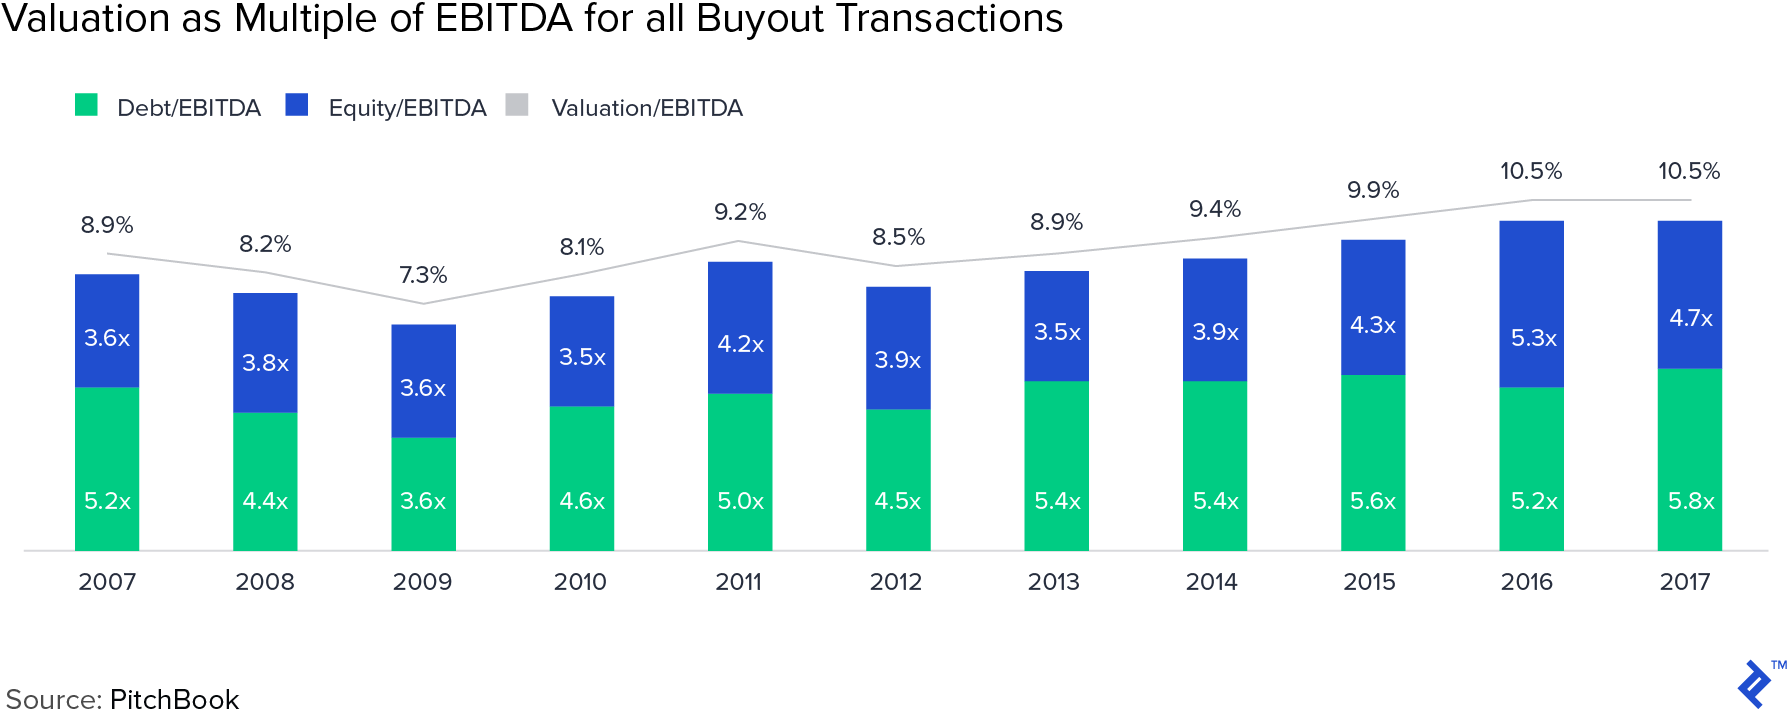 Valuation as a multiple of EBITDA for all buyout transactions